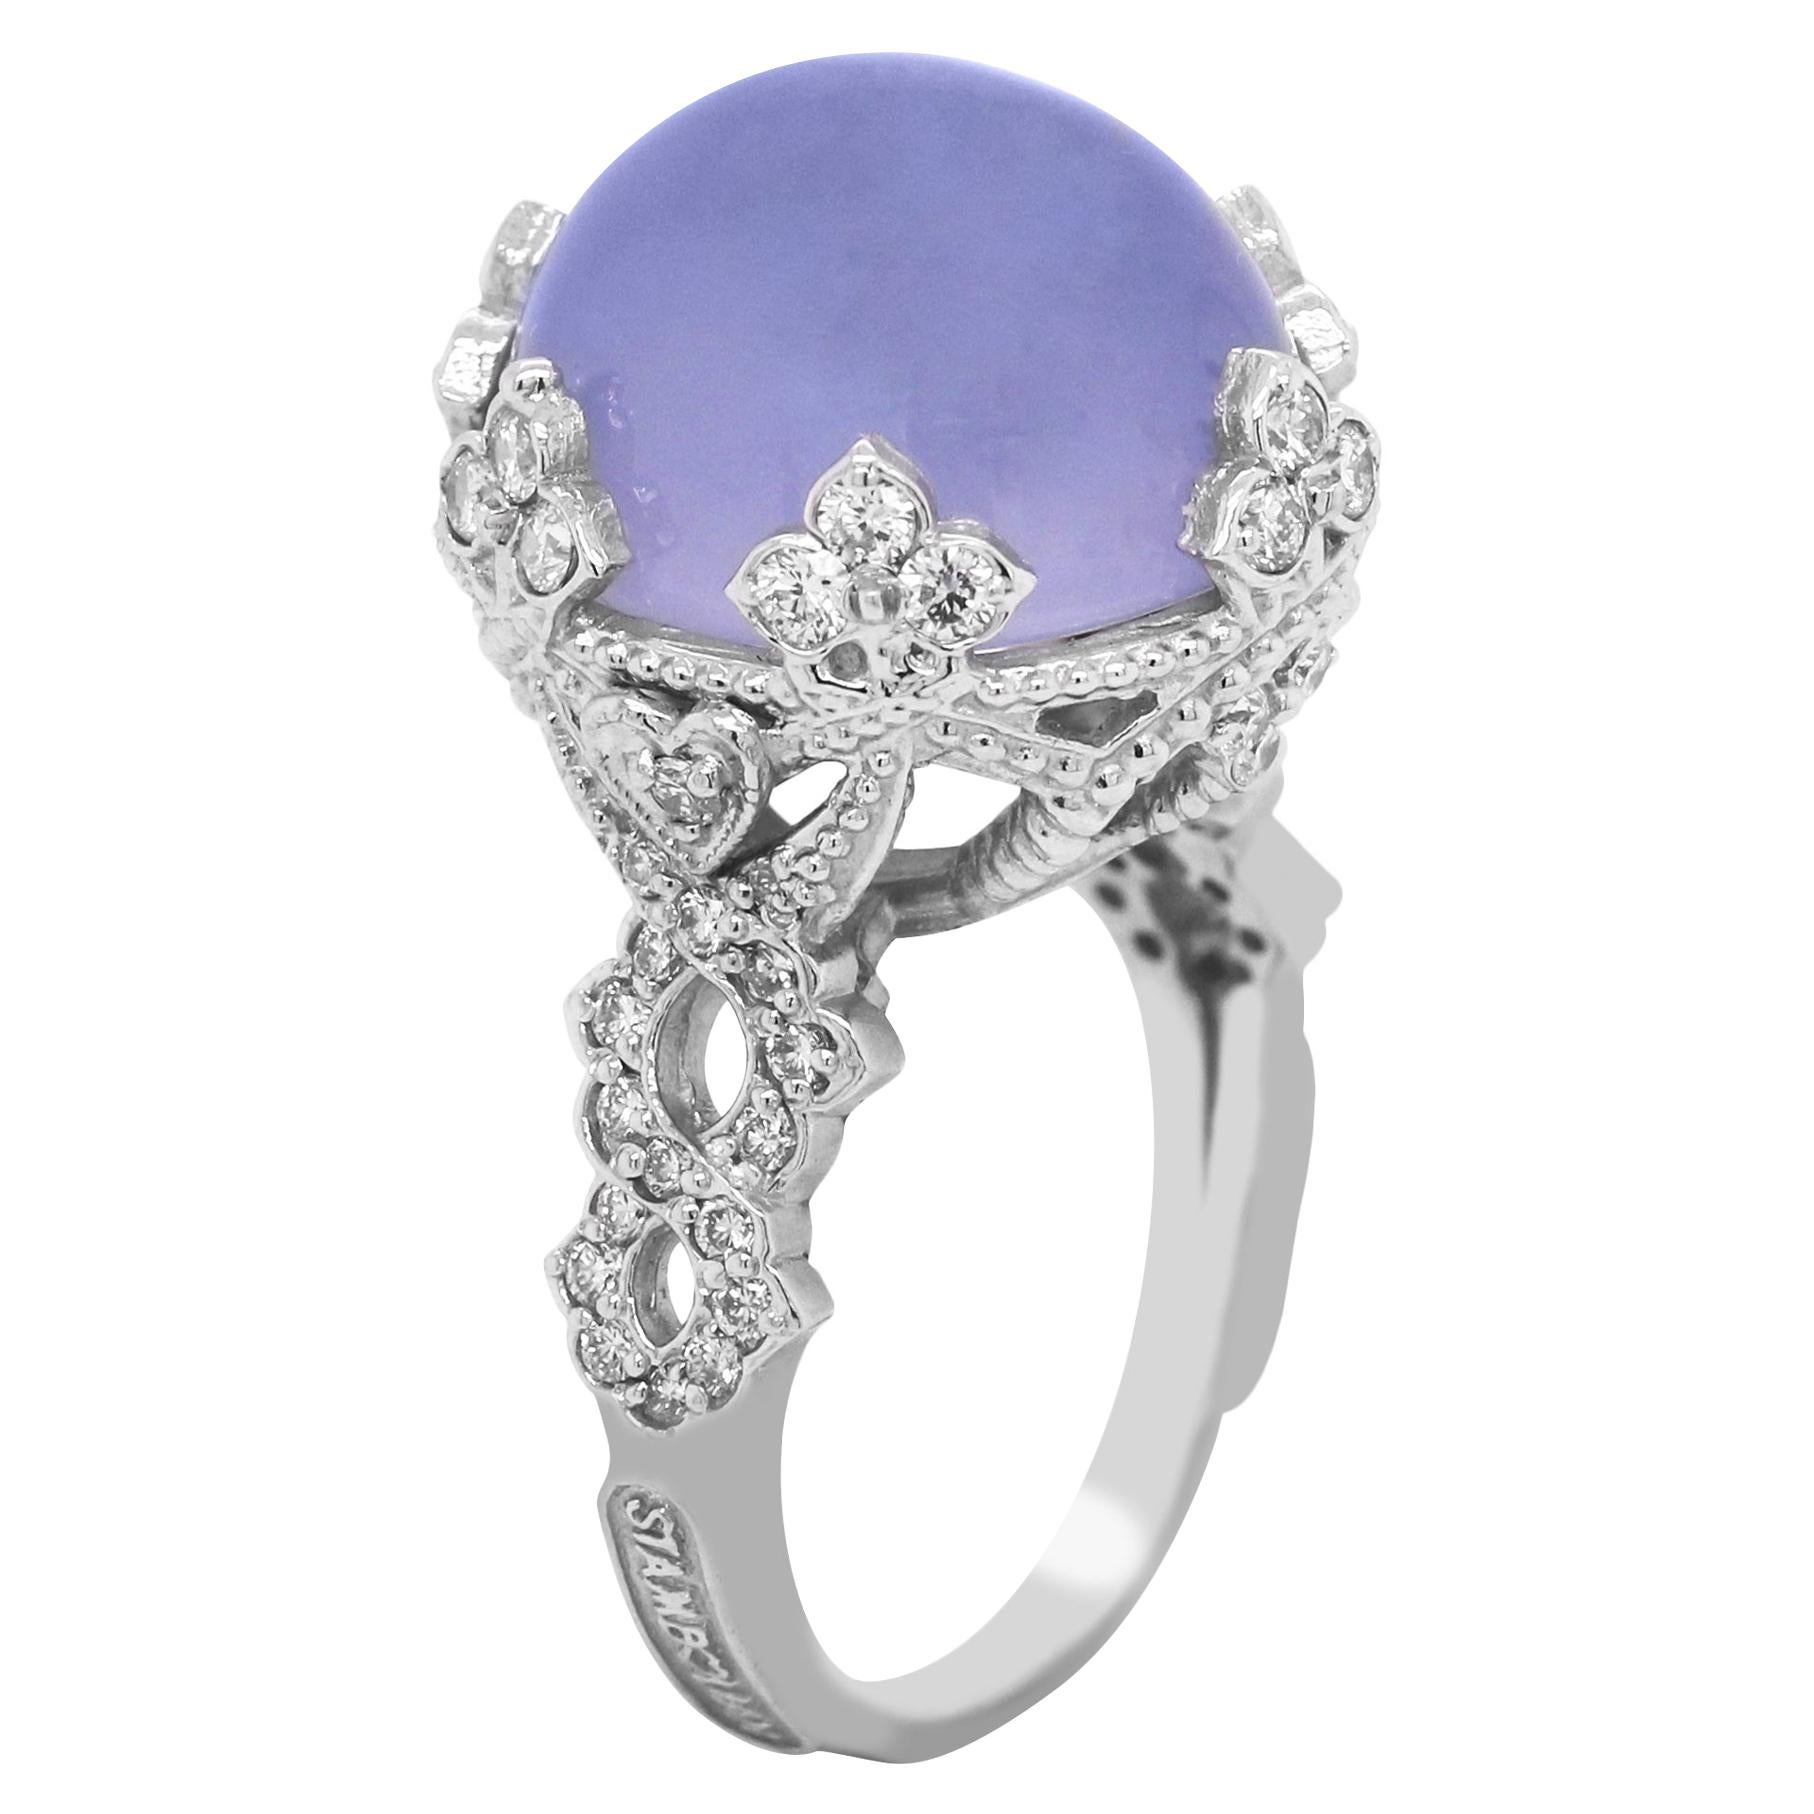 Stambolian White Gold and Diamond Cocktail Ring with Blue Chalcedony Center